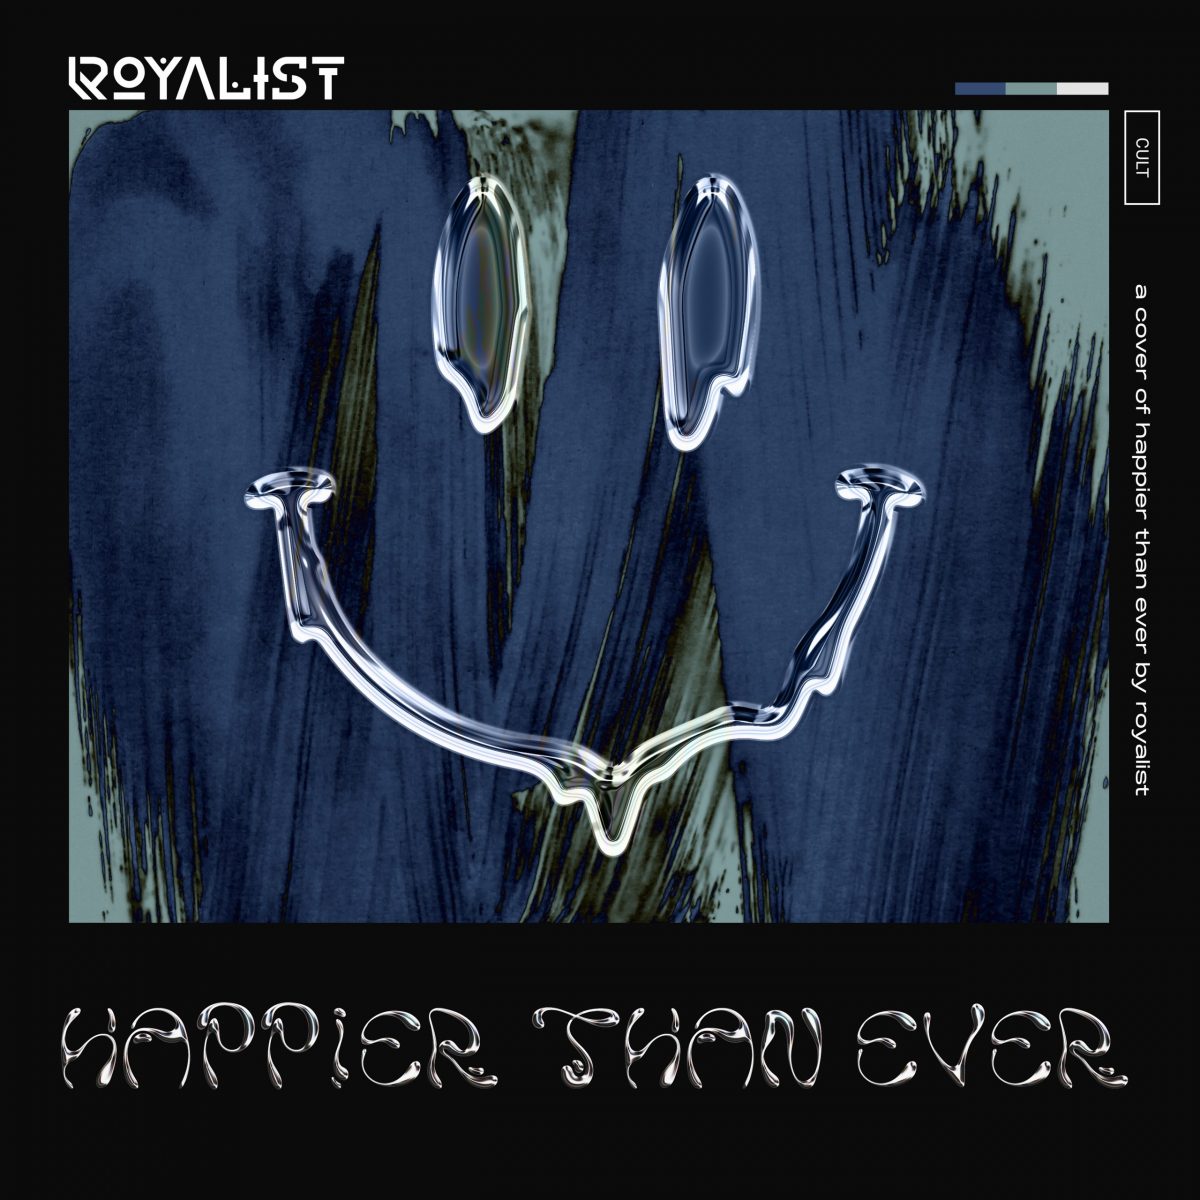 royalist-happier-than-ever-single-review